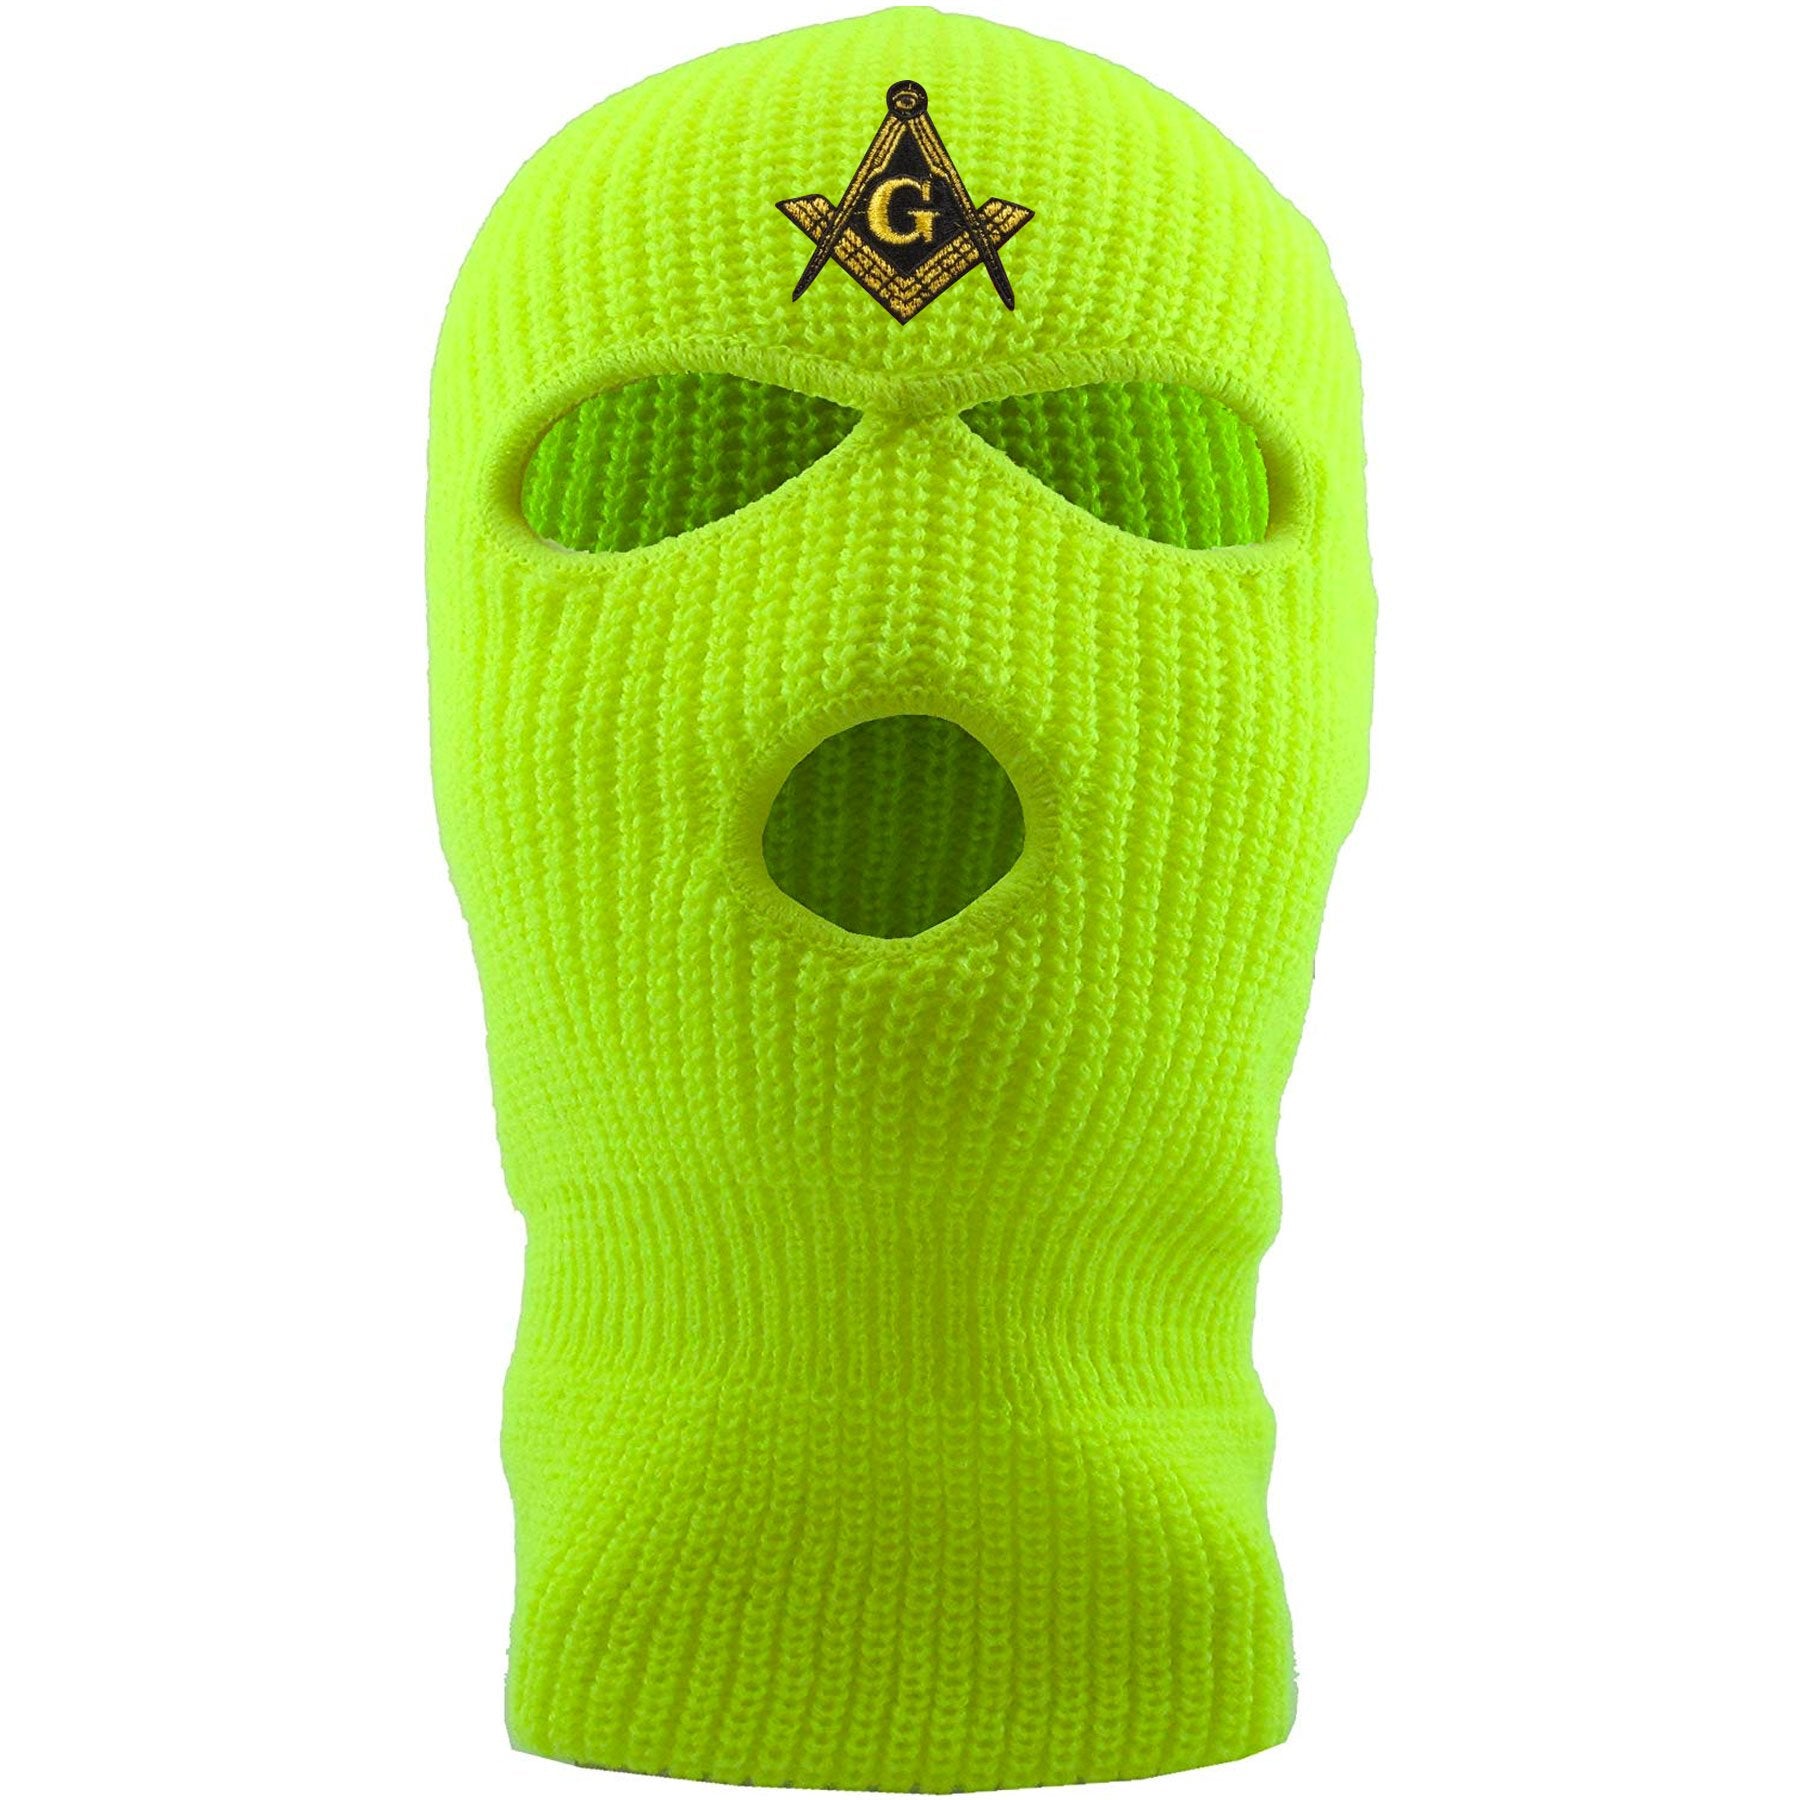 Embroidered on the front of the safety yellow masonic ski mask is the free mason square compass embroidered in metallic gold and black jackboys